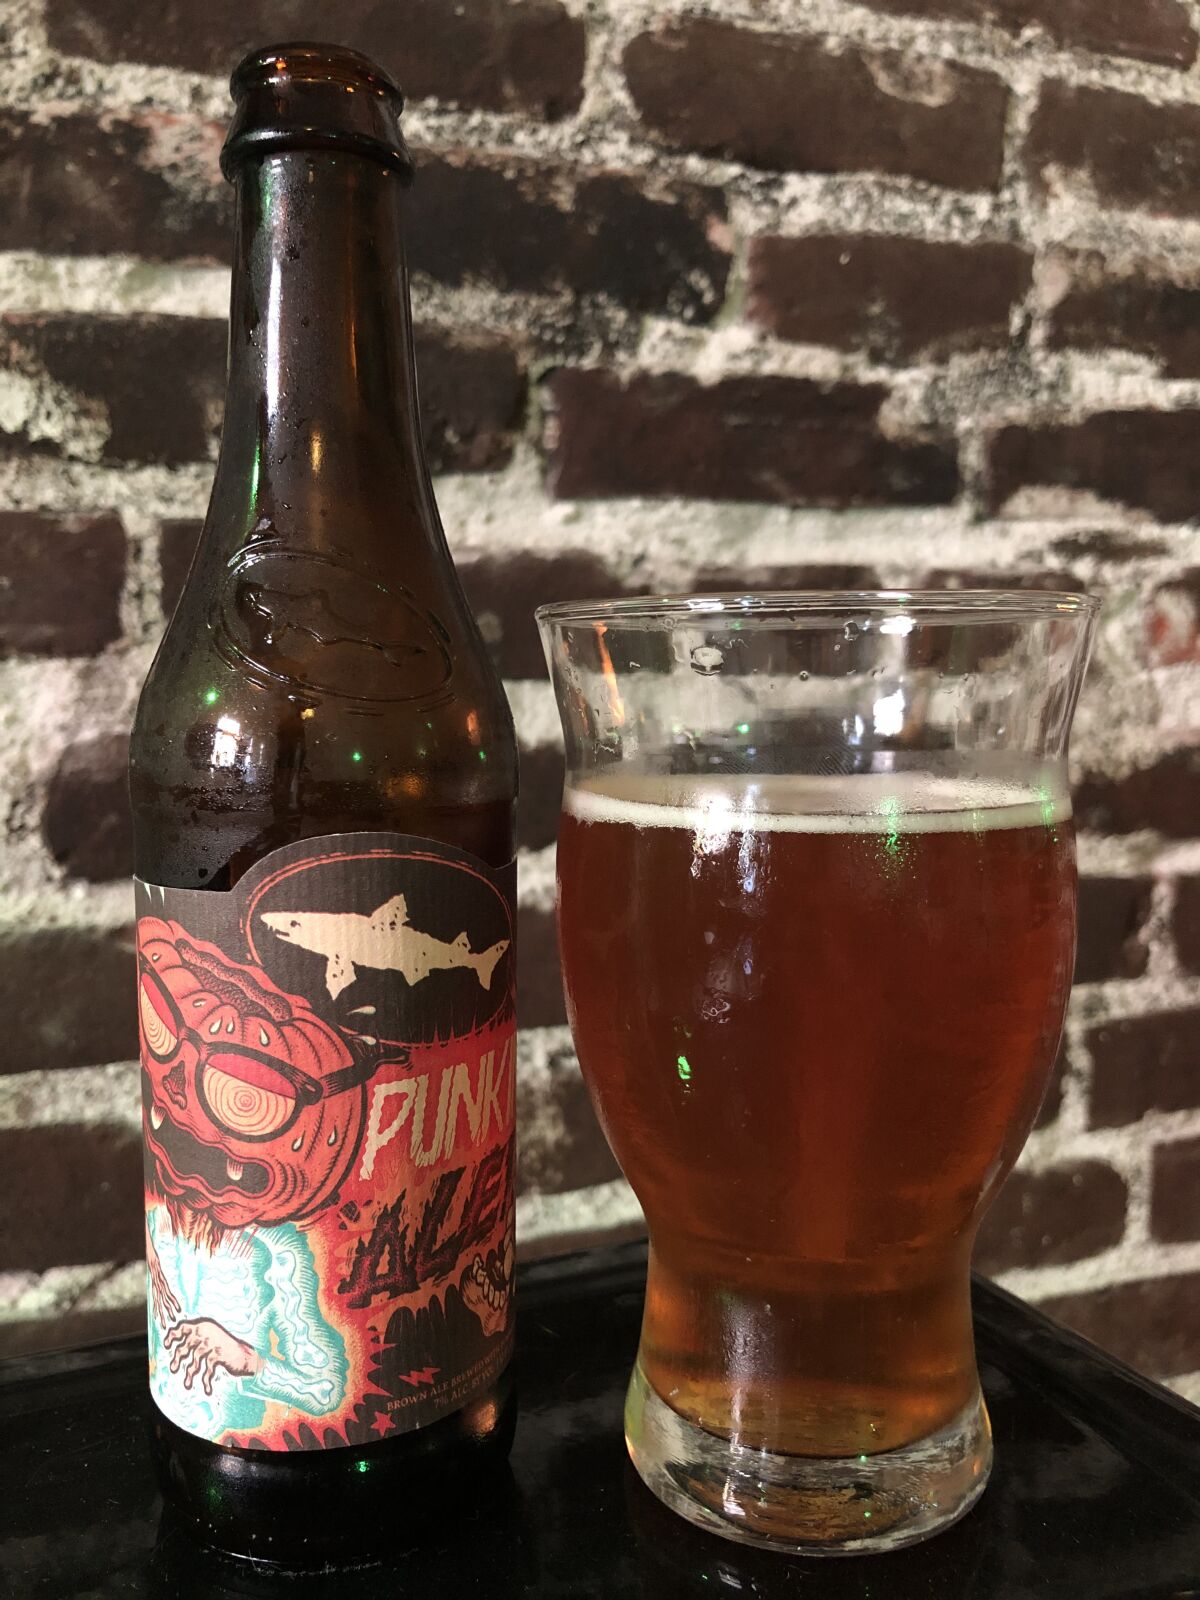 Punkin Ale, a pumpkin beer from Dogfish Head.